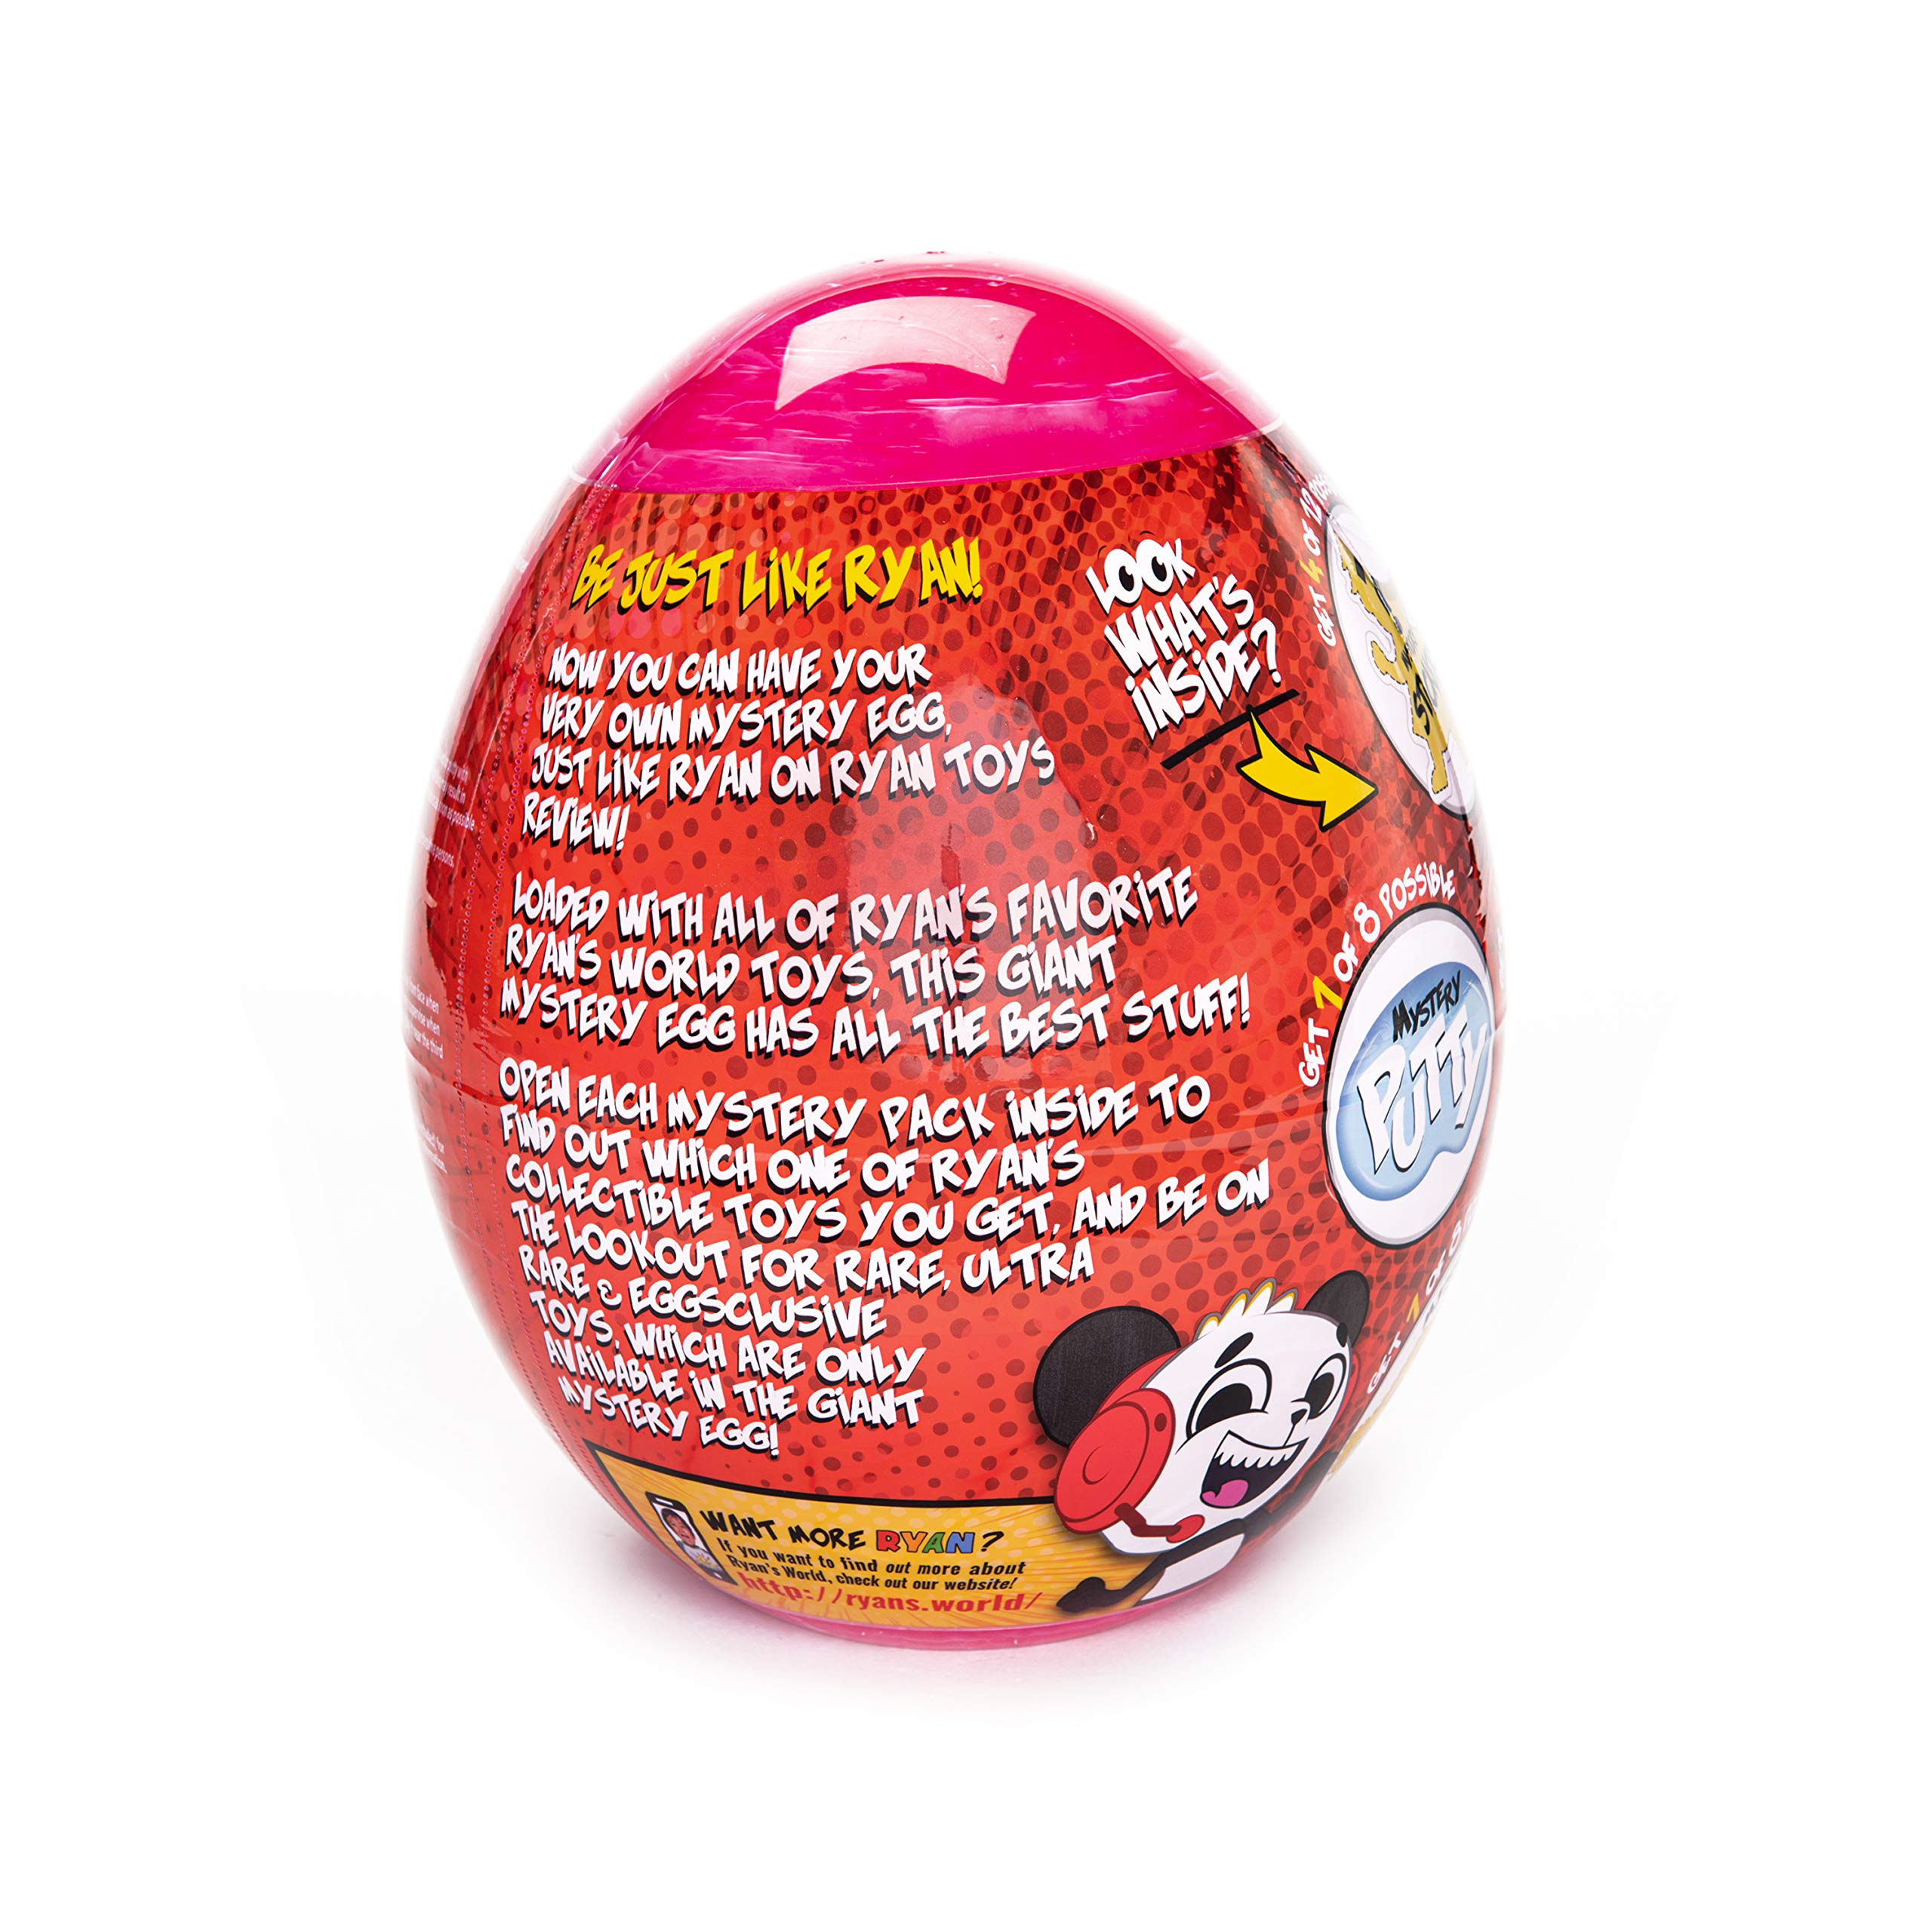 RYAN'S WORLD Giant Mystery Egg Series 6, Filled with Surprises, 1 of 3 Color Variety New Vehicles, 2 Ultra-Rare Figures, 2 Build-a-Ryan Figures, Special Putty, 1 Squishy and Stickers, Toy for Kids